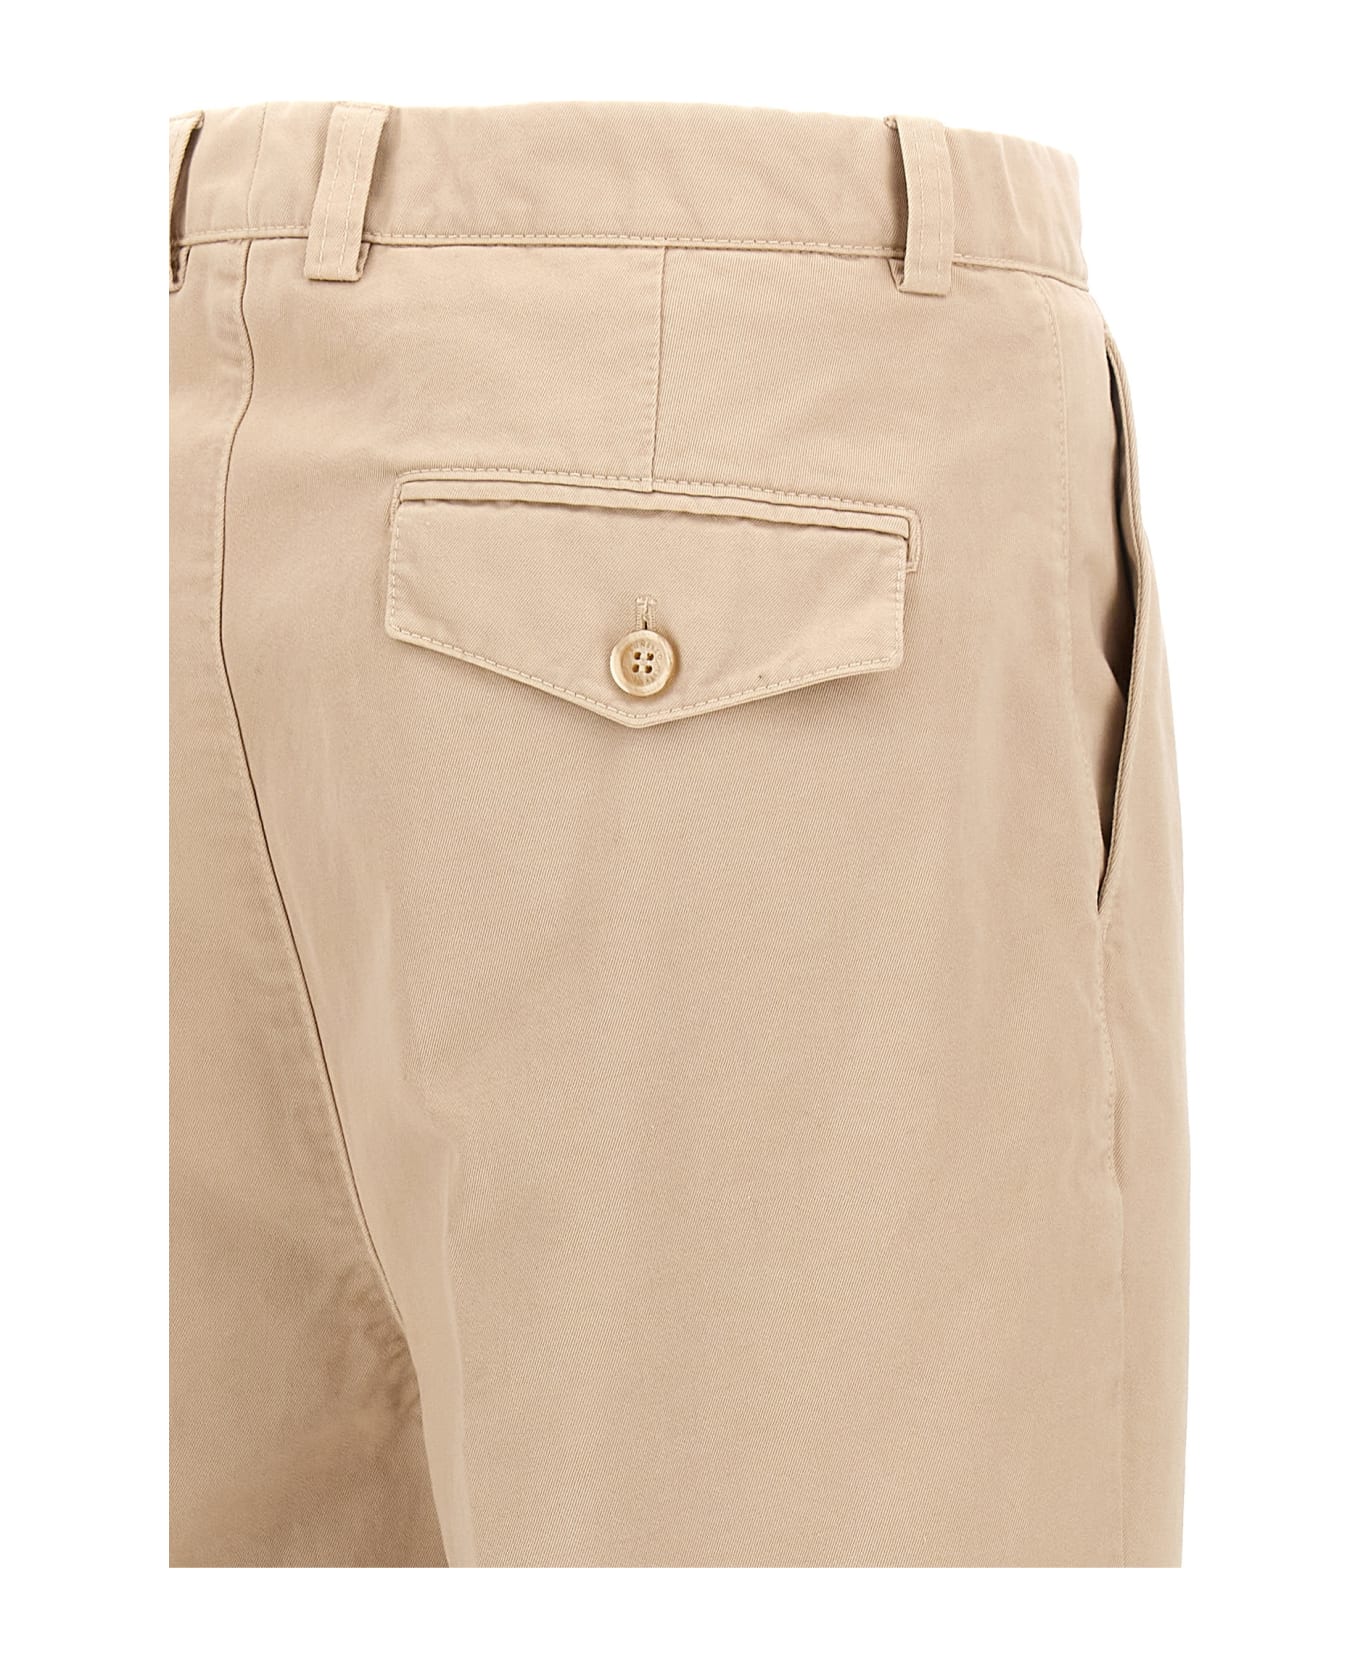 Brunello Cucinelli Cotton Pants With Front Pleats - Beige ボトムス